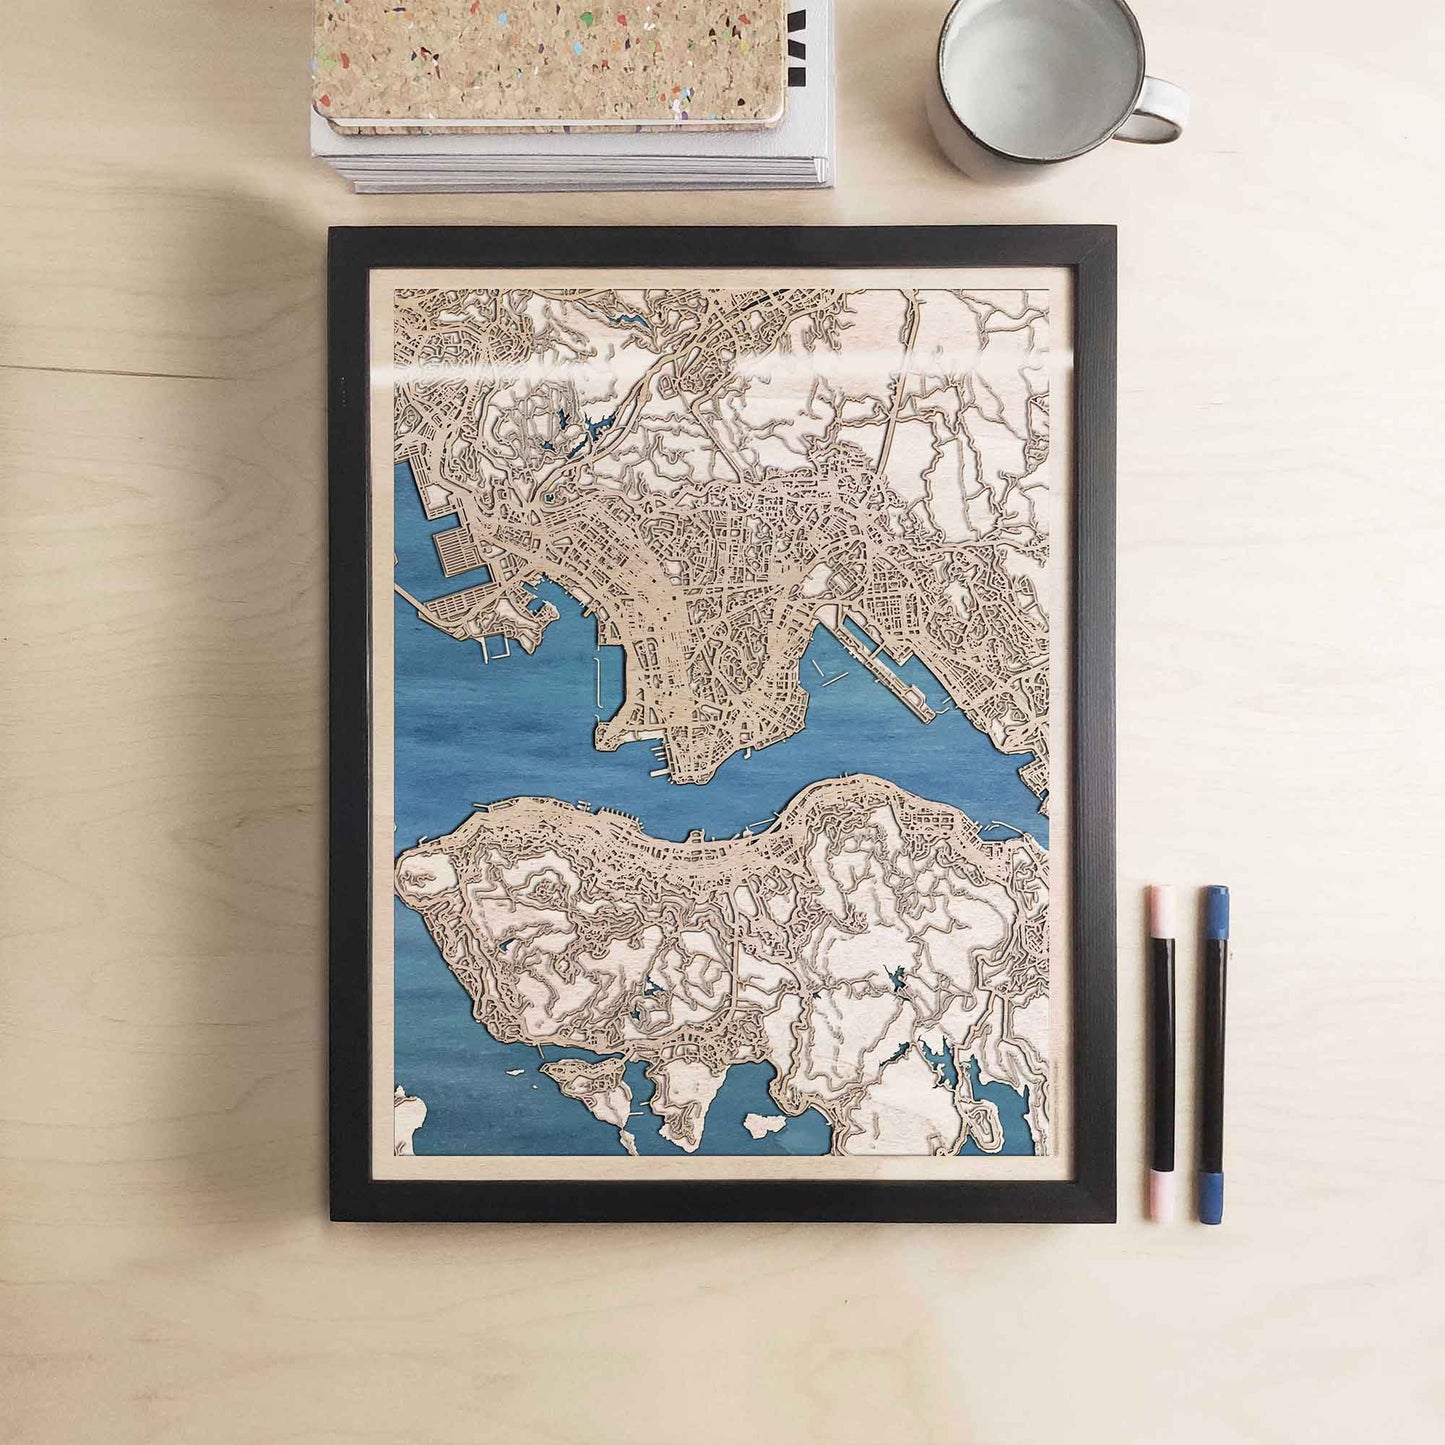 Hong Kong Wooden Map by CityWood - Custom Wood Map Art - Unique Laser Cut Engraved - Anniversary Gift